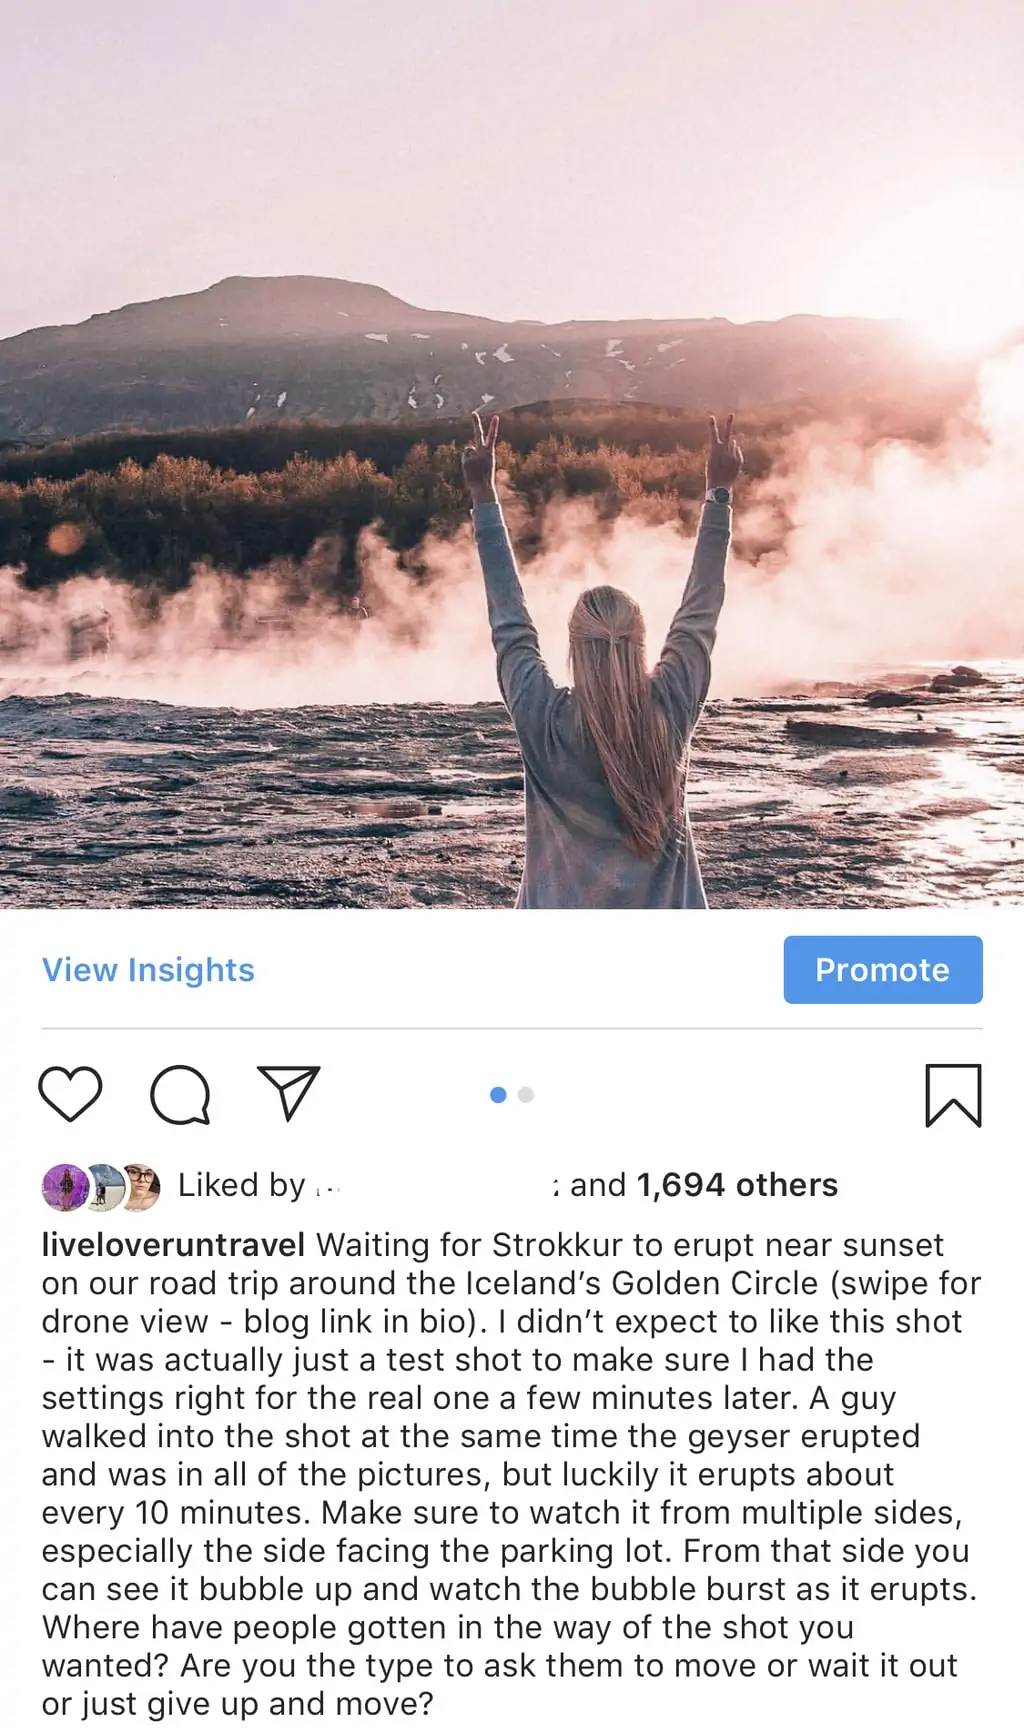 Instagram carousels allow you to post more than one video or image at a time like this one that includes a photo and a video. If you've ever had trouble getting one to post, this might be the reason why (and it's a quick fix!). Plus, don't miss the other tips for posting carousels on Instagram and getting good engagement on them.